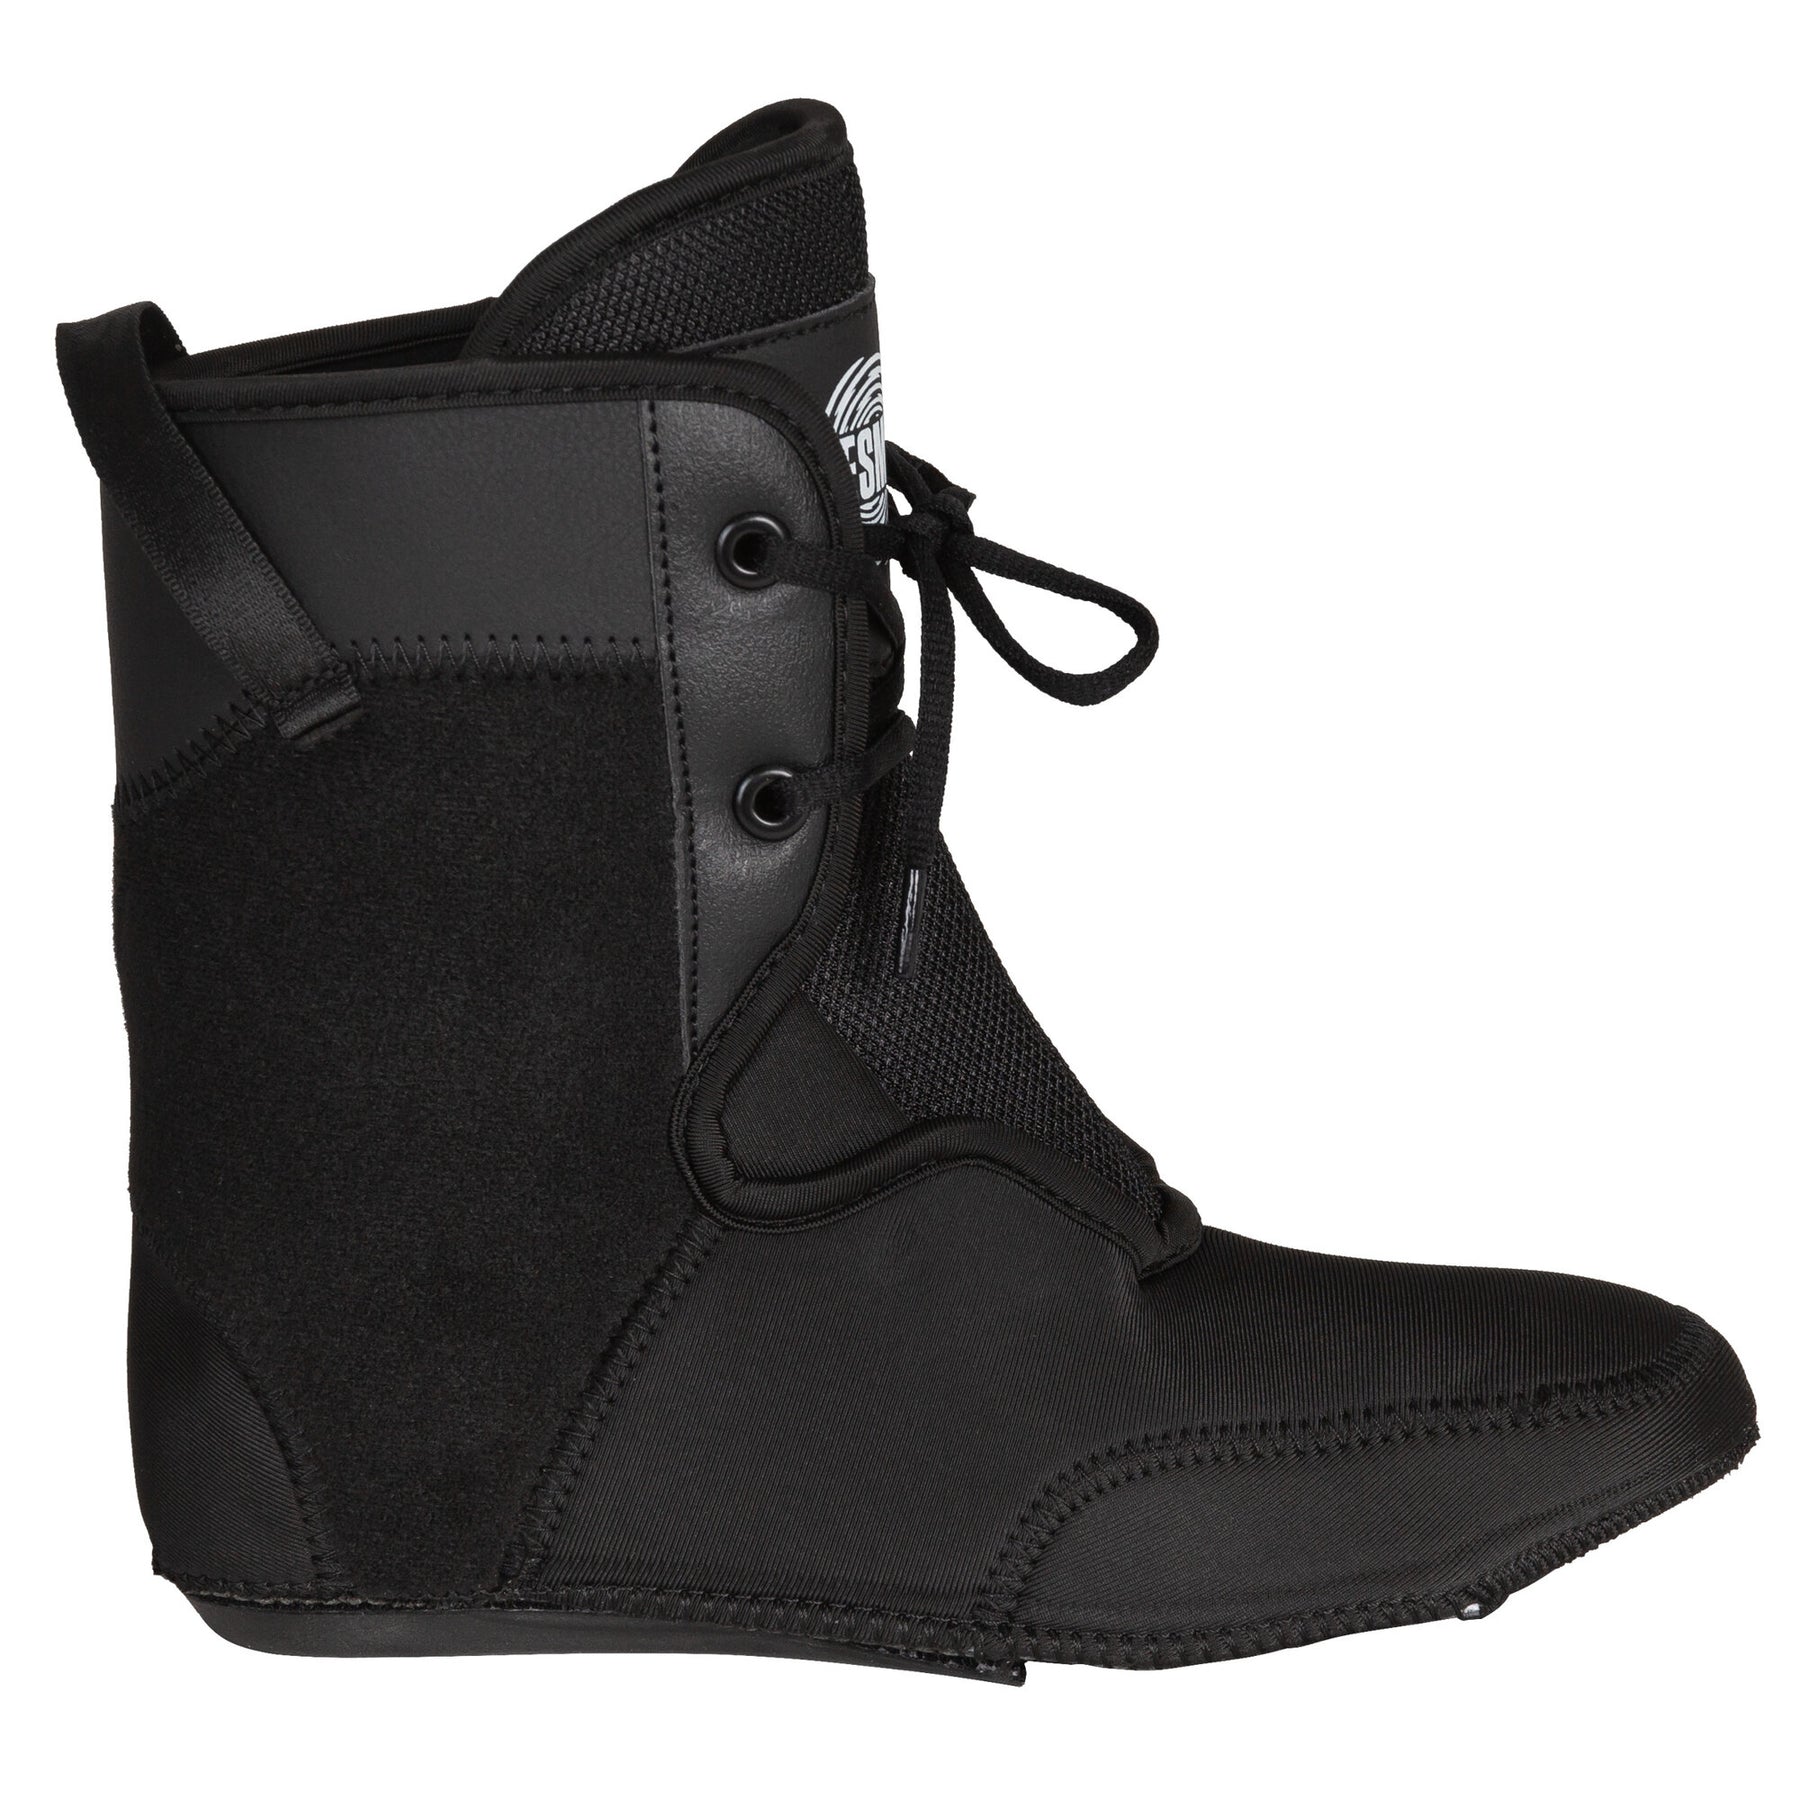 Mesmer Throne TS1 Boot only – Disroyal